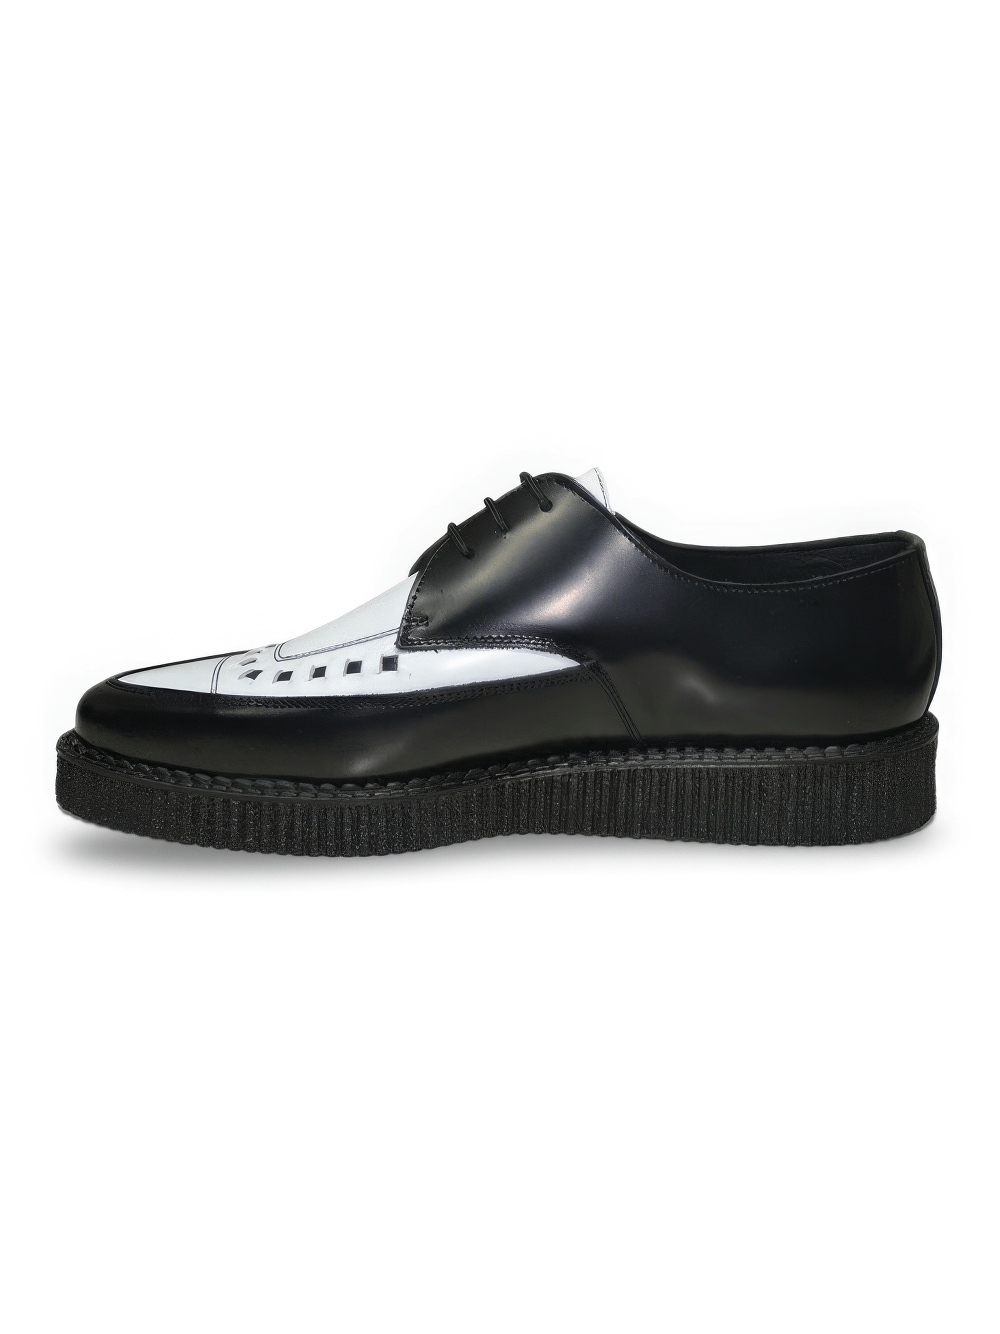 Unisex Lace-Up Pointed Creepers in Classic Black and White